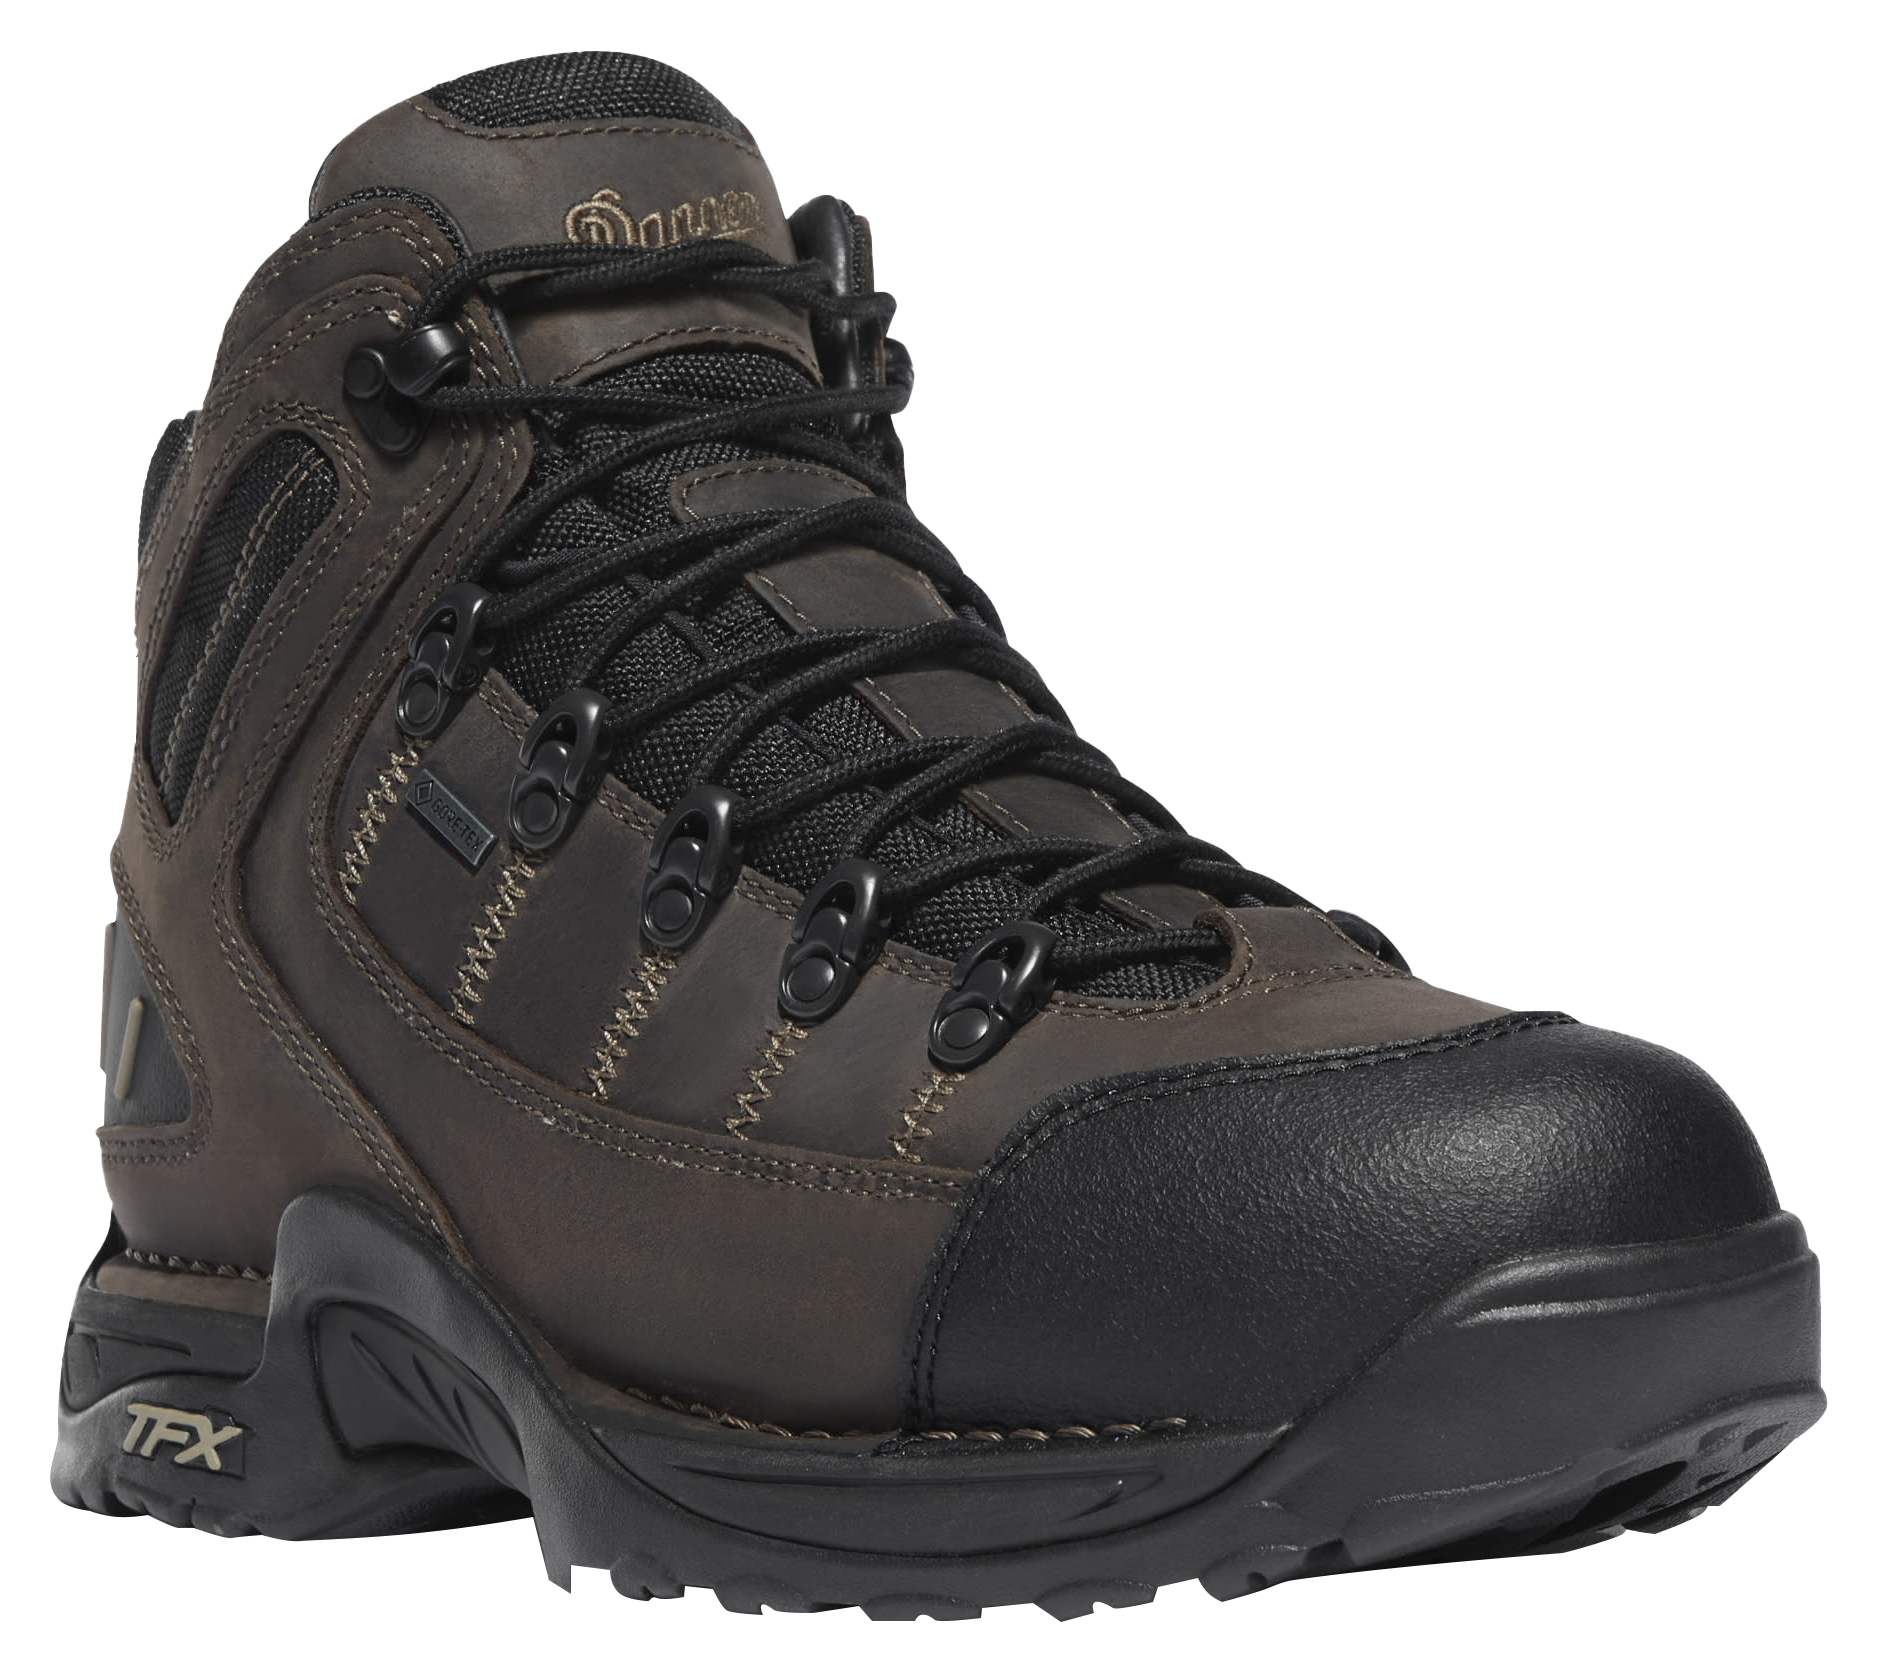 Danner 453 GORE-TEX Waterproof Hiking Boots for Men - Loam Brown/Chocolate Chip - 11.5M